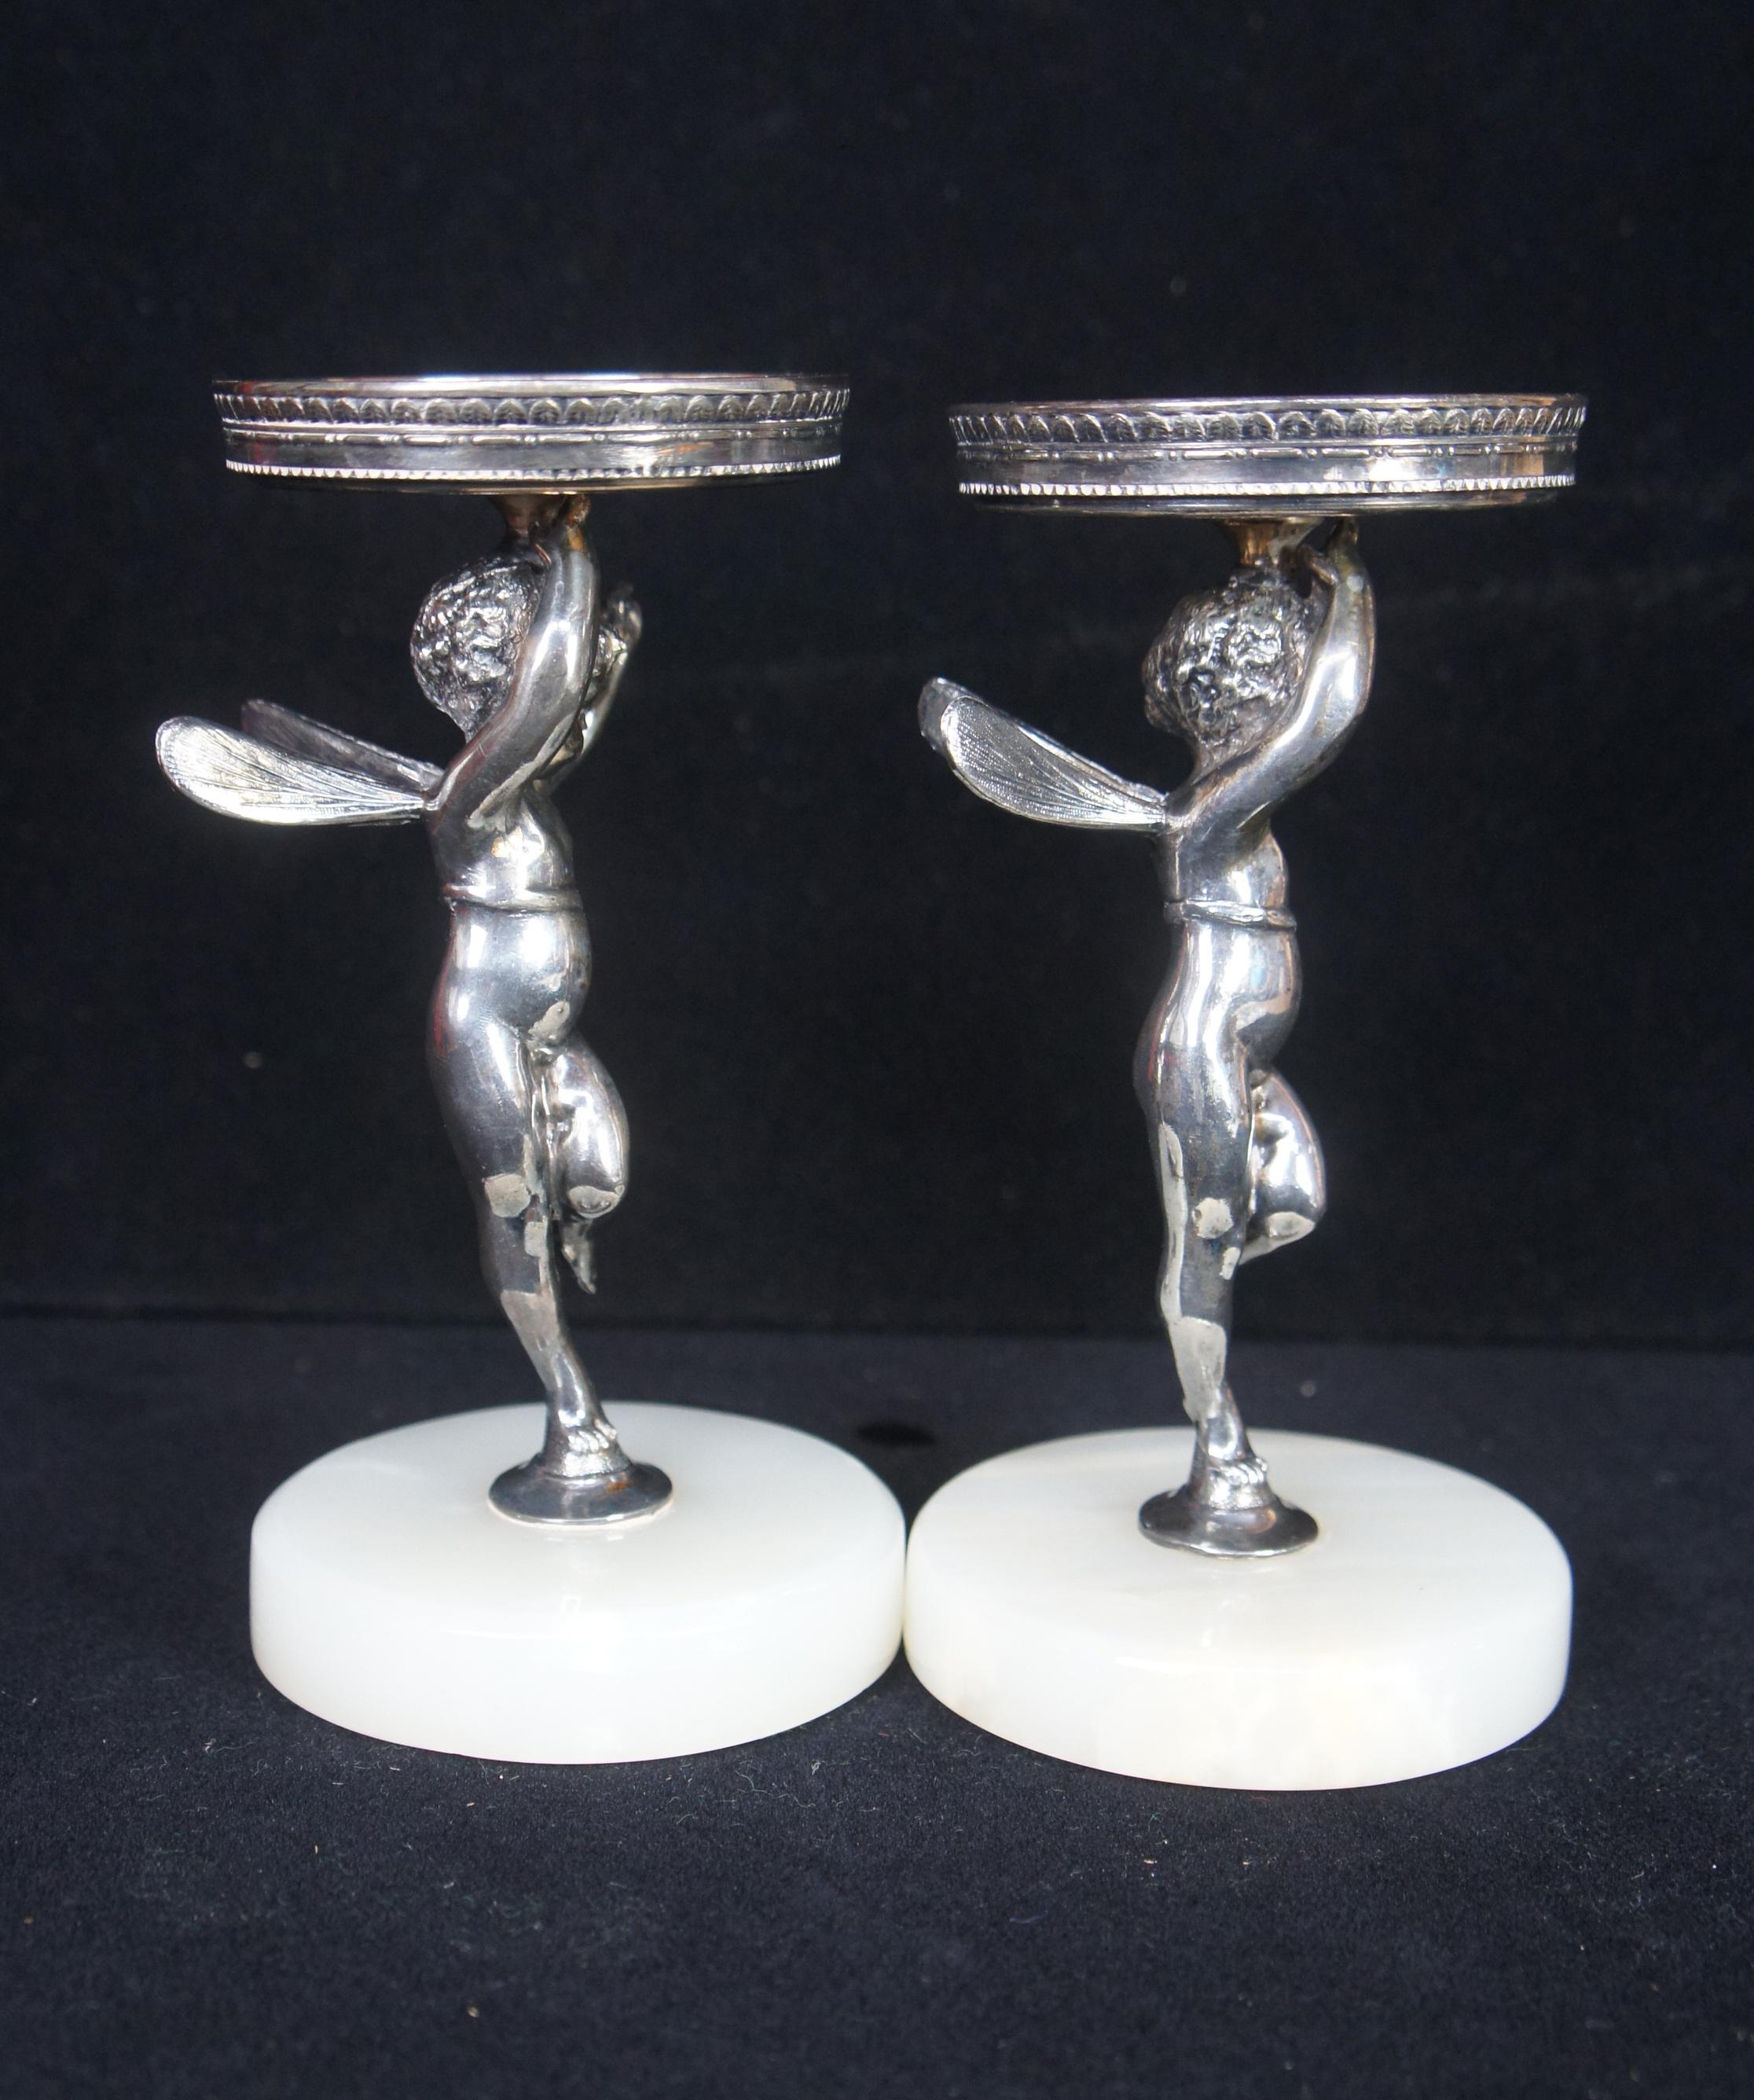 2 Art Nouveau Figural Fairy Cherub Silver Plated Marble Glass Candy Compotes 3